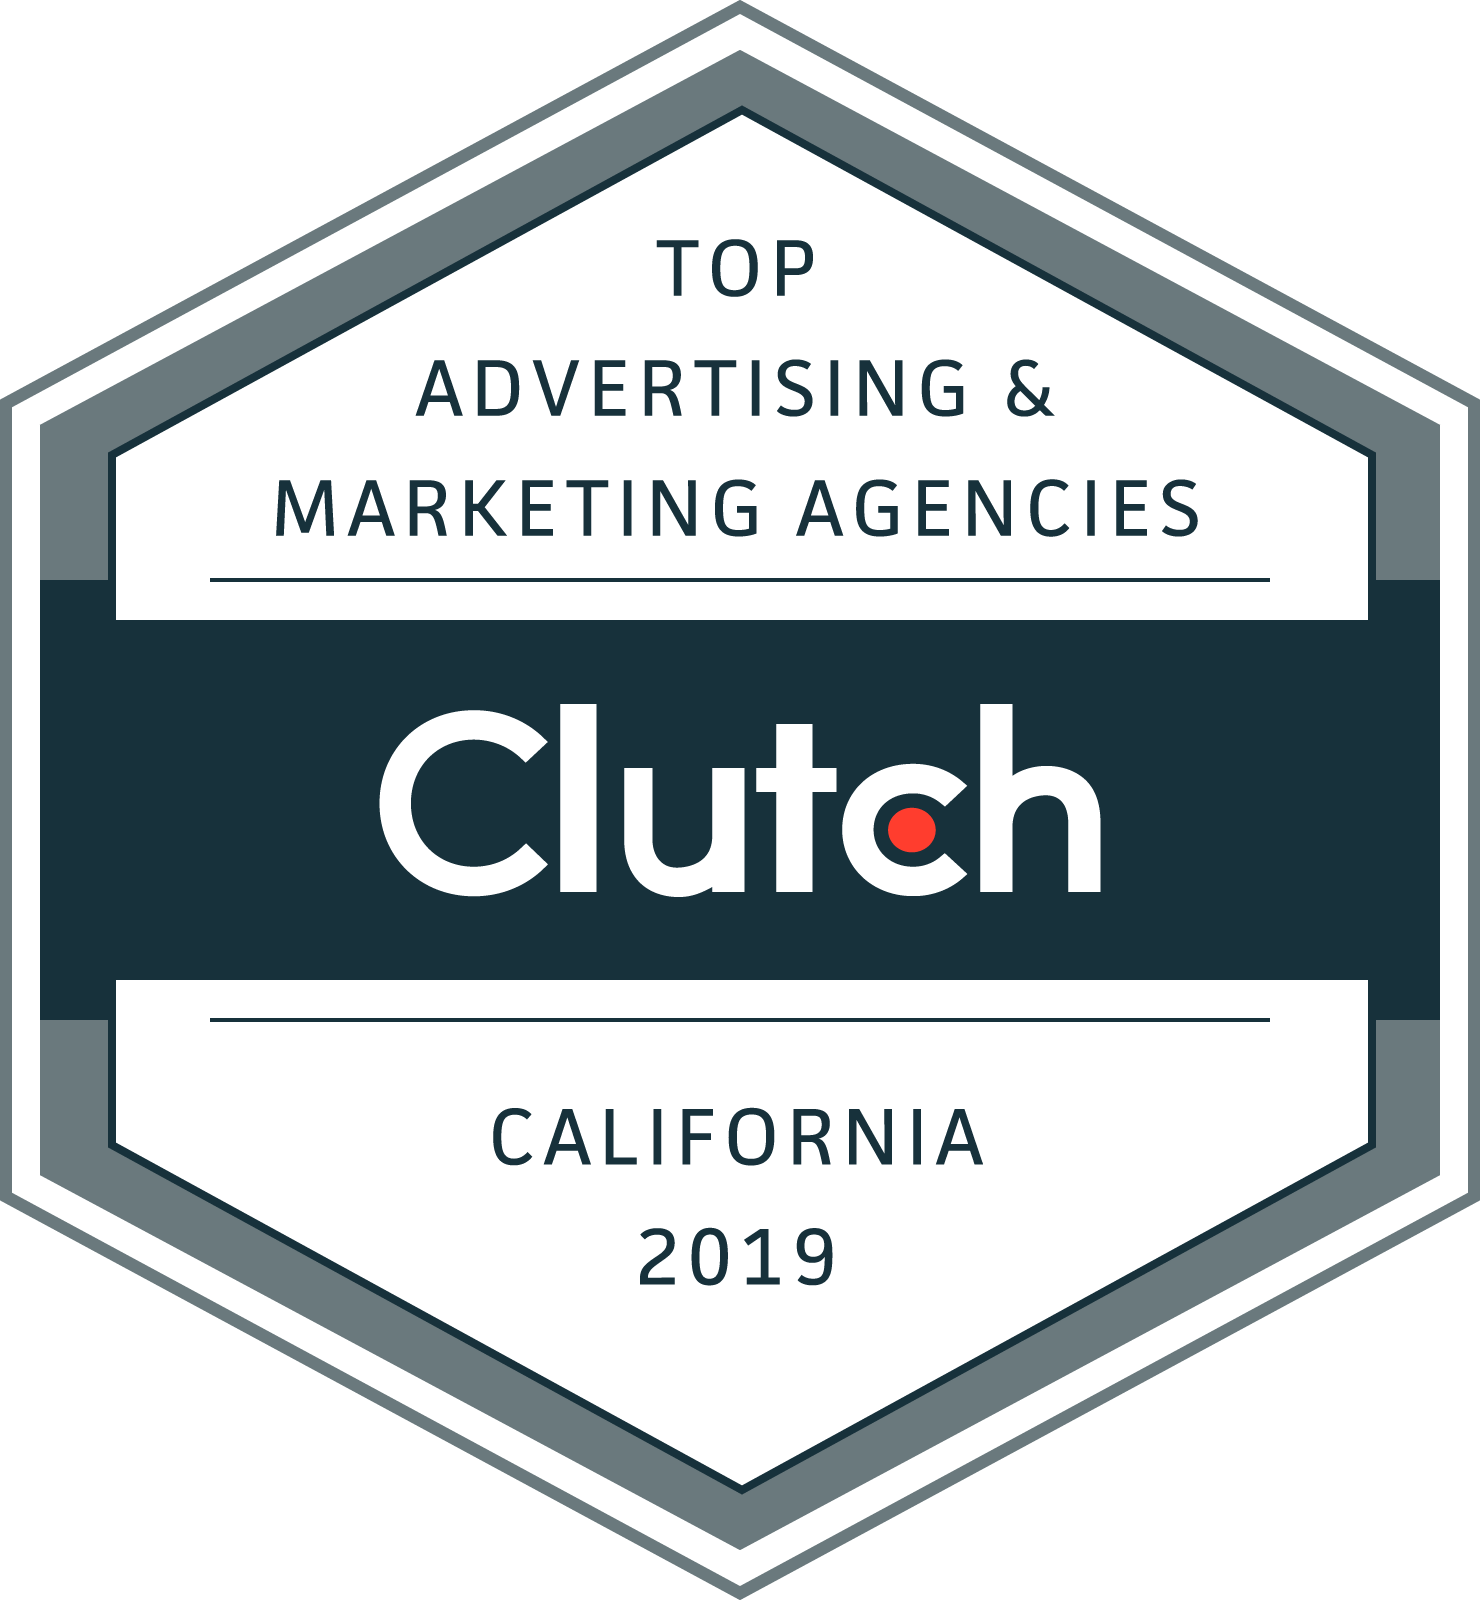 Sachs Marketing Group ranked highly amongst SEO service providers in California by Clutch